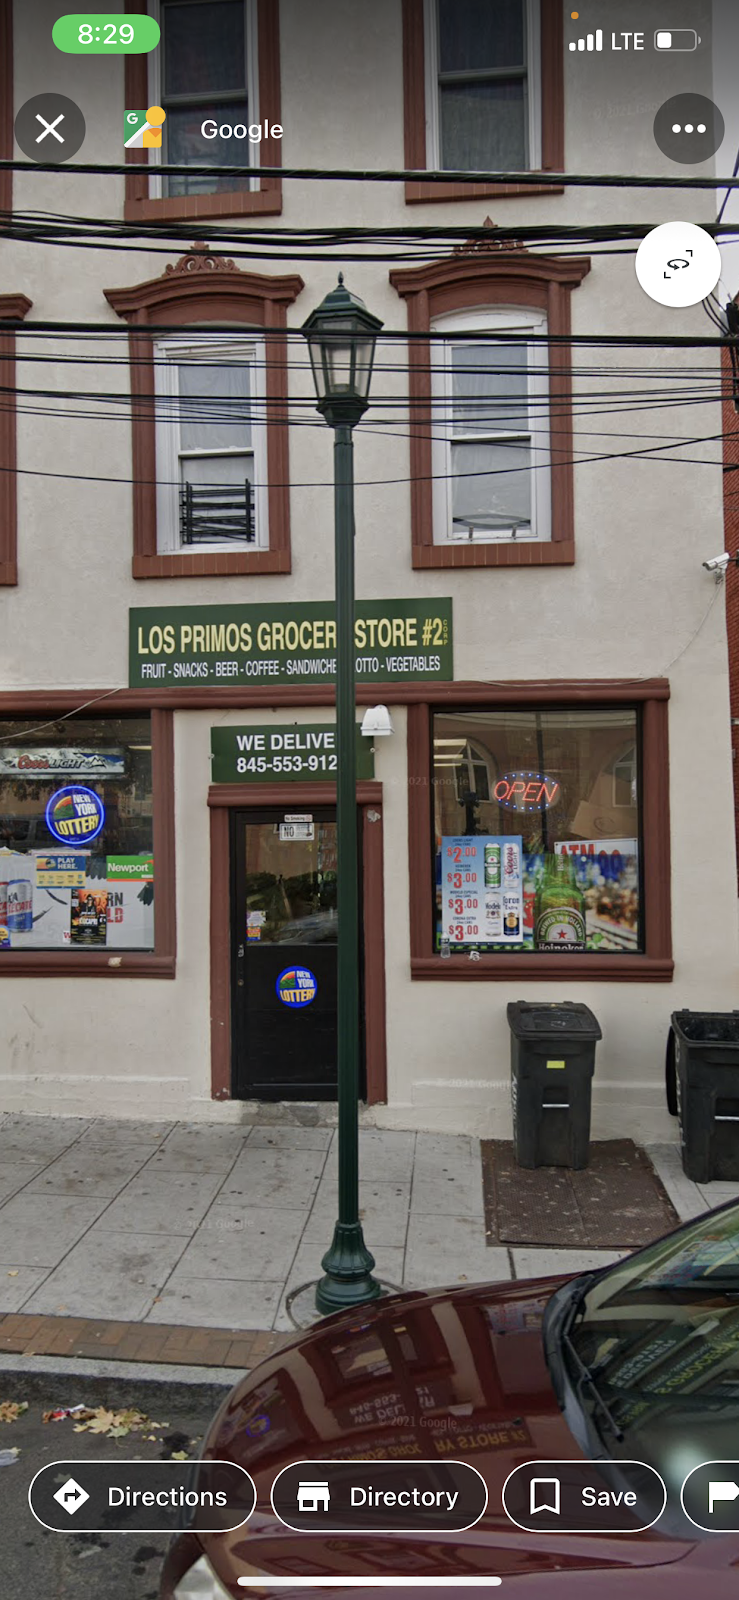 Los primos grocery store #2 | 72 Main St, Haverstraw, NY 10927 | Phone: (845) 553-9121